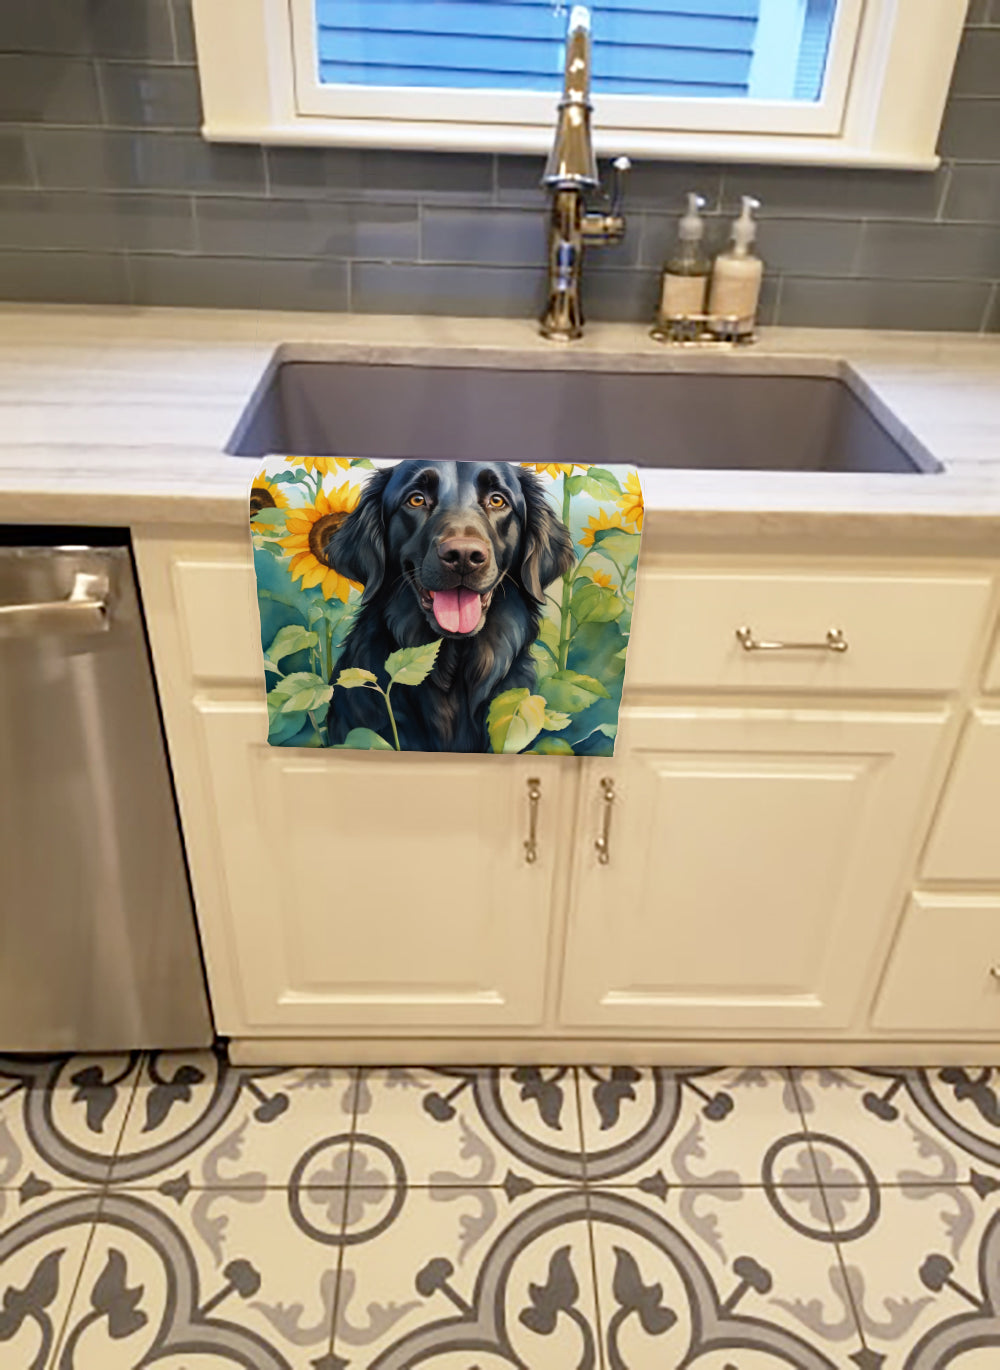 Buy this Flat-Coated Retriever in Sunflowers Kitchen Towel